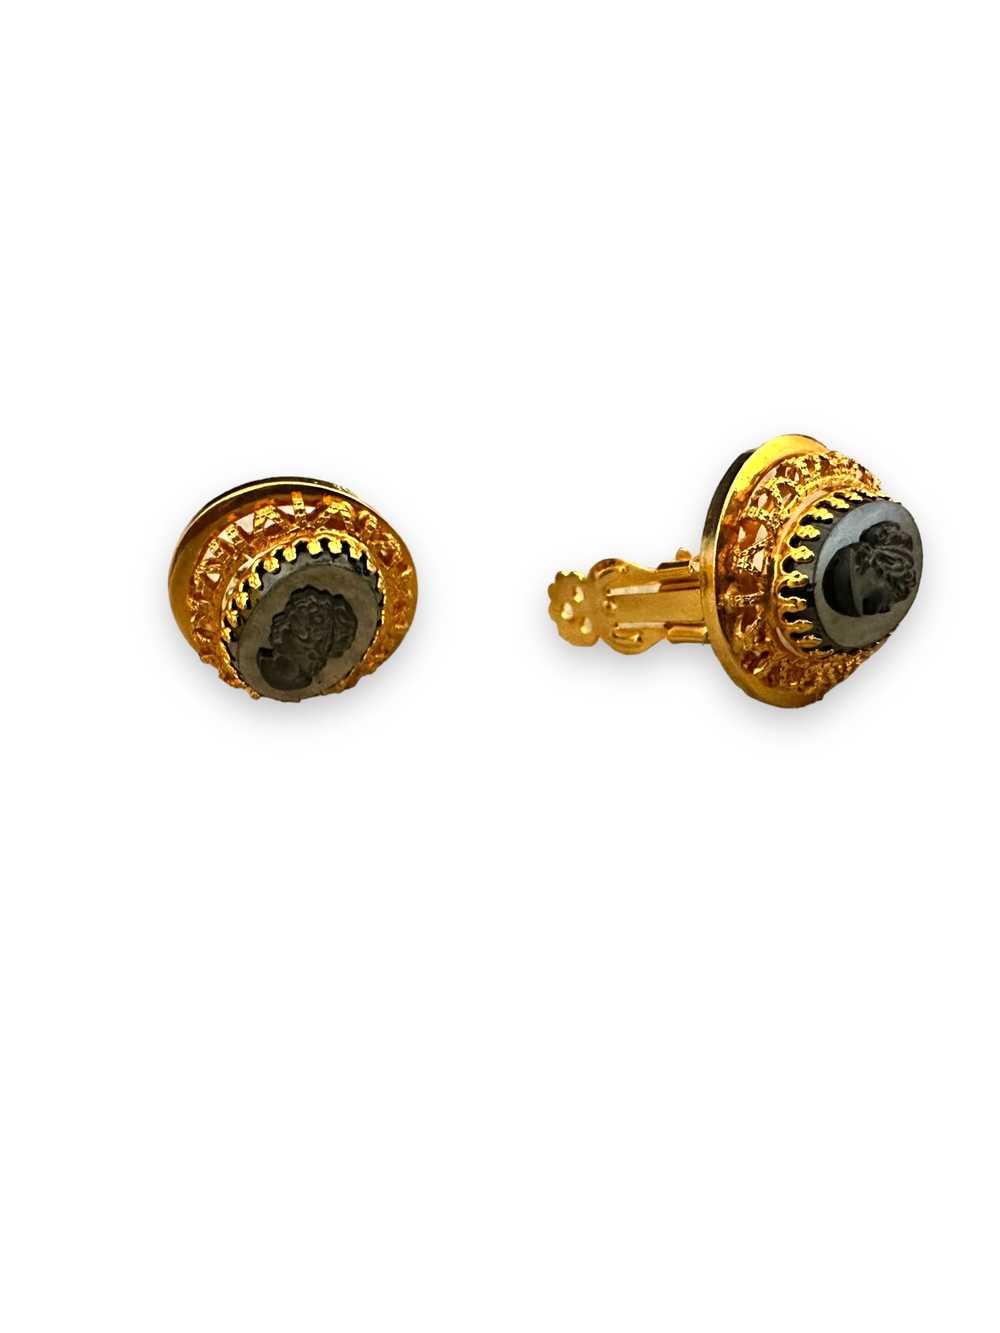 1990s Gold + Onyx Cameo - image 2